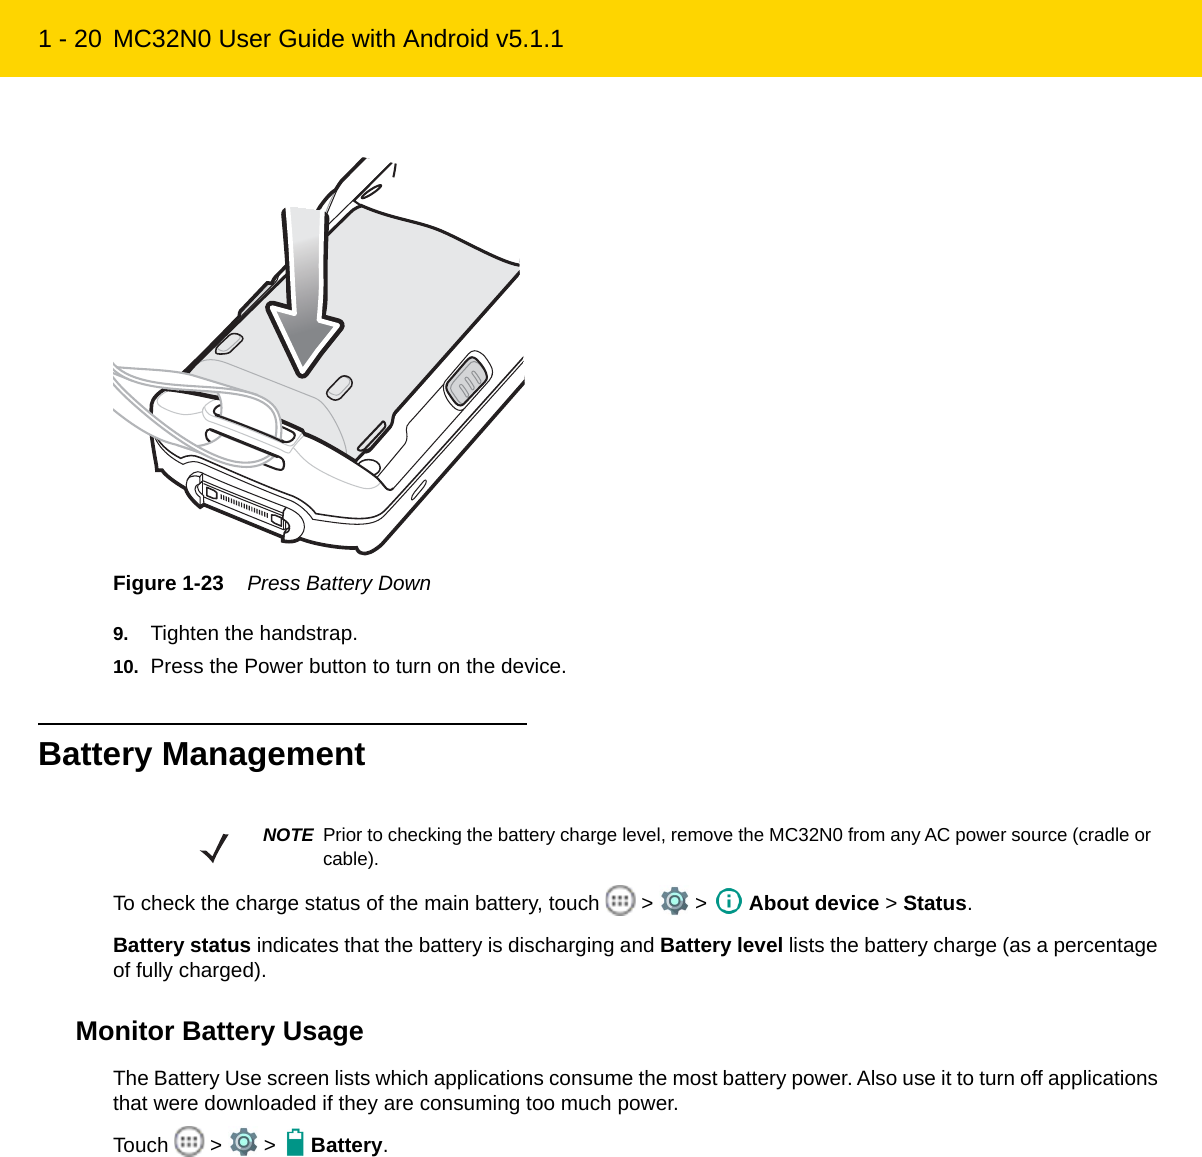 1 - 20 MC32N0 User Guide with Android v5.1.1Figure 1-23    Press Battery Down9. Tighten the handstrap.10. Press the Power button to turn on the device.Battery ManagementTo check the charge status of the main battery, touch   &gt;   &gt;   About device &gt; Status.Battery status indicates that the battery is discharging and Battery level lists the battery charge (as a percentage of fully charged).Monitor Battery UsageThe Battery Use screen lists which applications consume the most battery power. Also use it to turn off applications that were downloaded if they are consuming too much power.Touch  &gt;  &gt;  Battery.NOTE Prior to checking the battery charge level, remove the MC32N0 from any AC power source (cradle or cable).REVIEW ONLY - REVIEW ONLY - REVIEW ONLY                             REVIEW ONLY - REVIEW ONLY - REVIEW ONLY